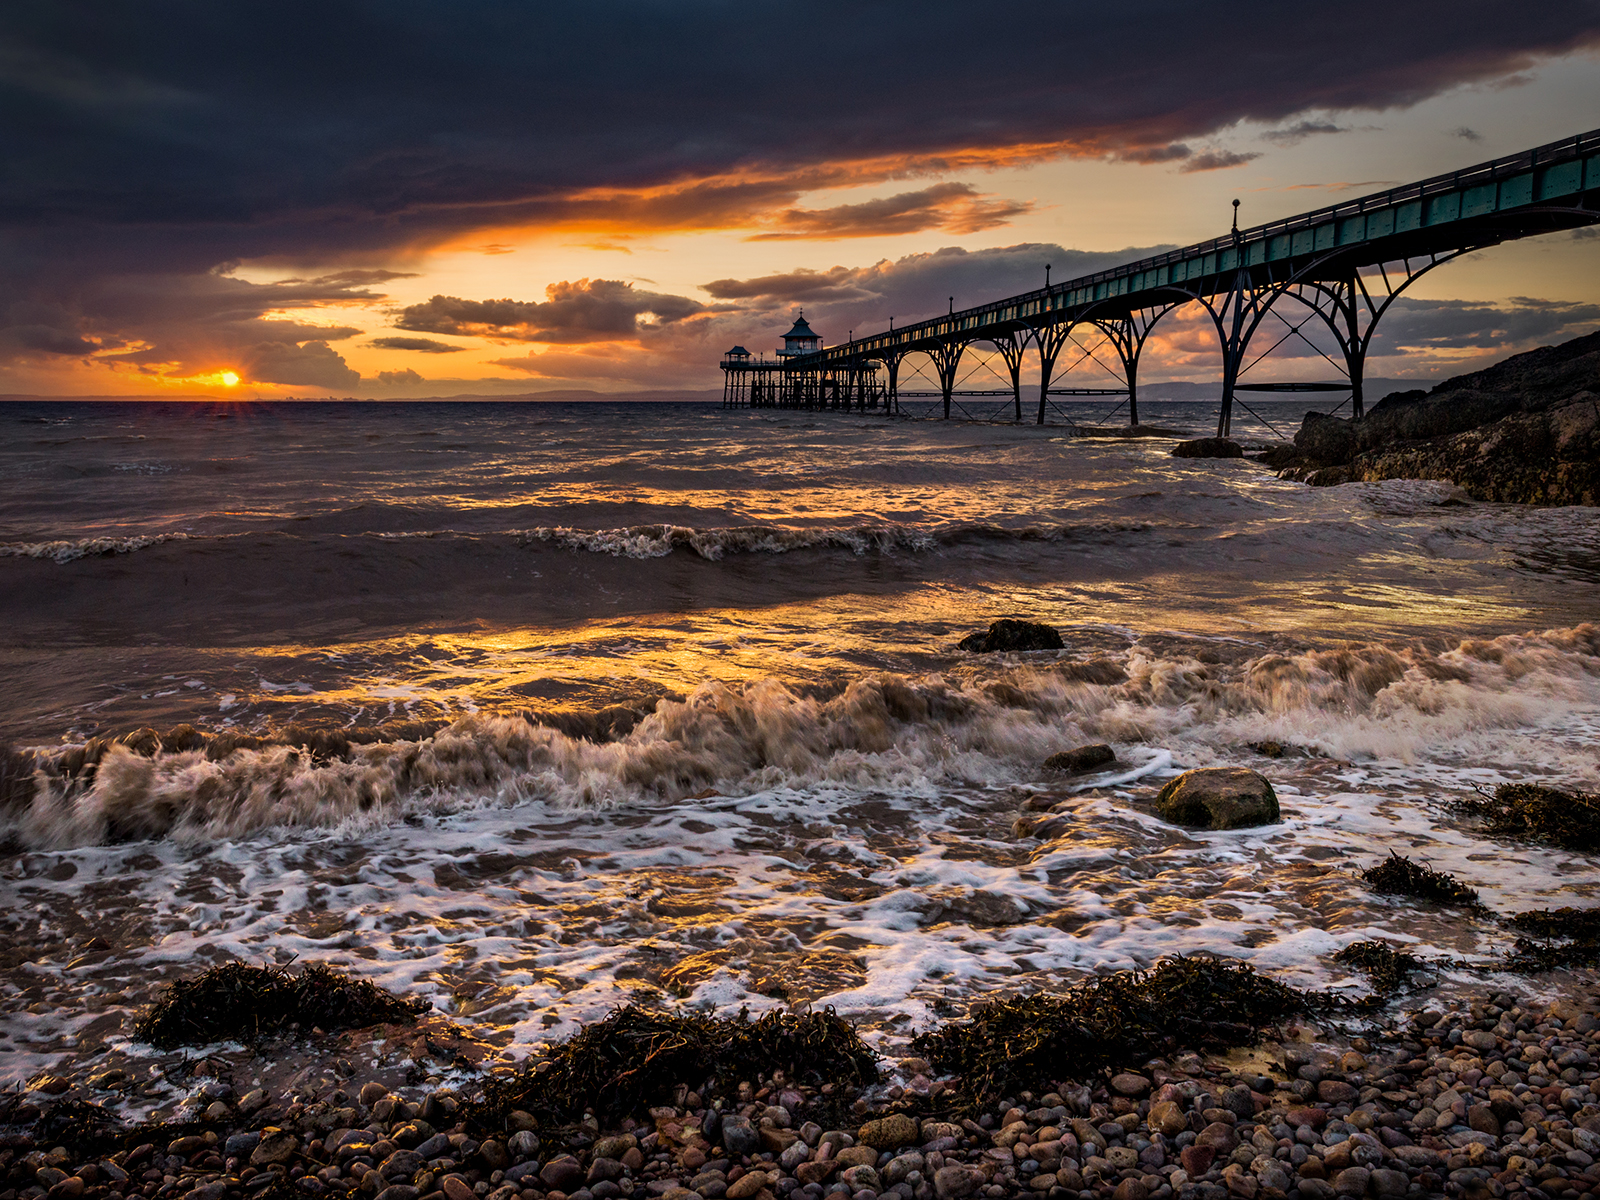 STORM CLOUDS OVER CLEVEDON by Lois Webb